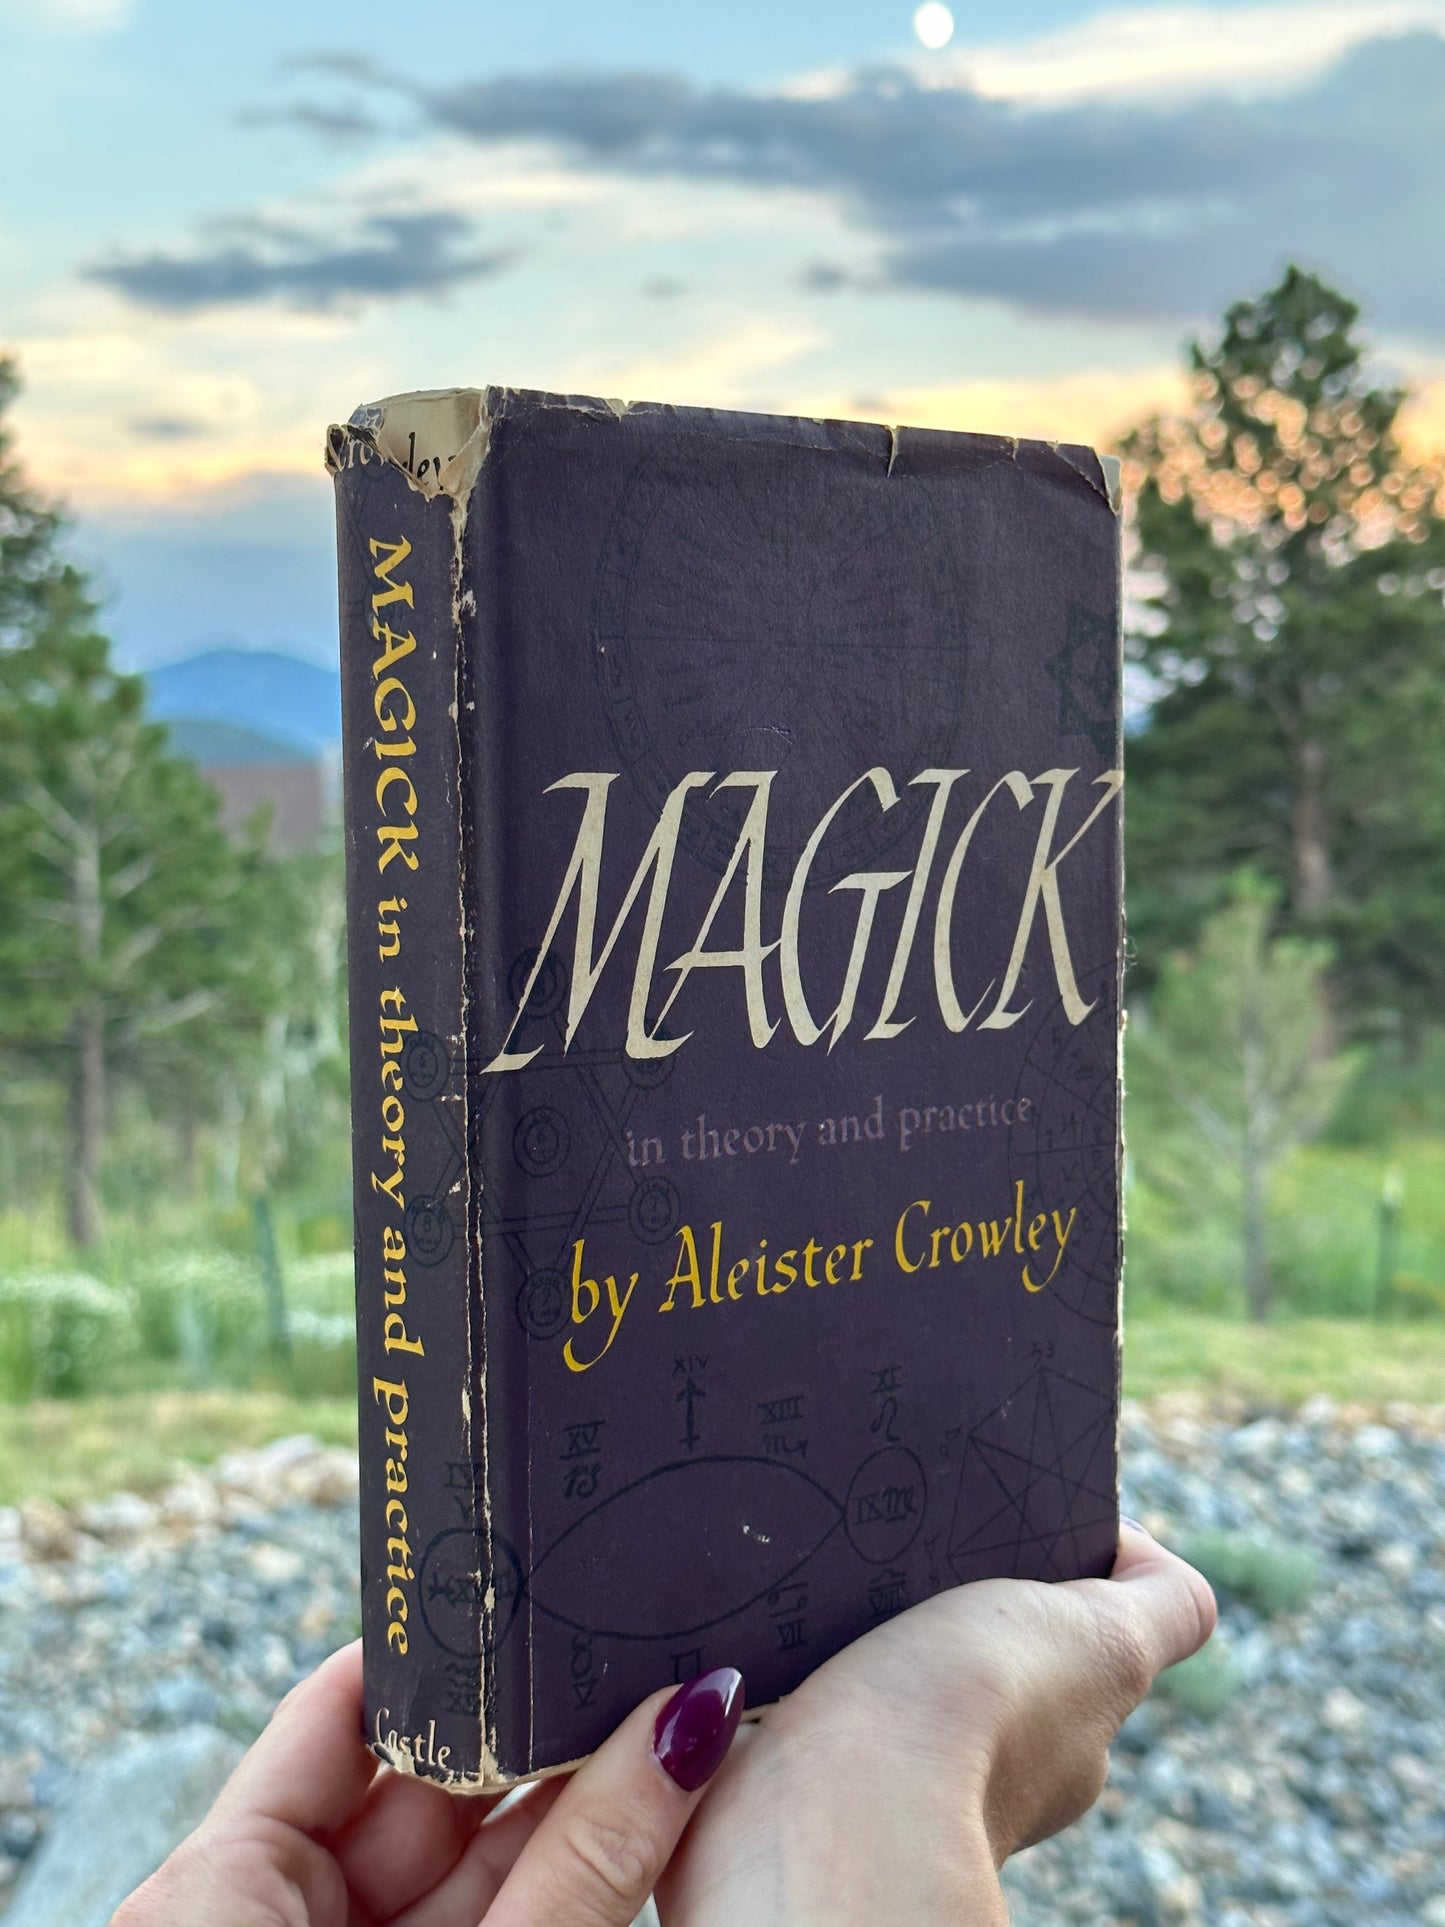 Magick In Theory and Practice by Aleister Crowley